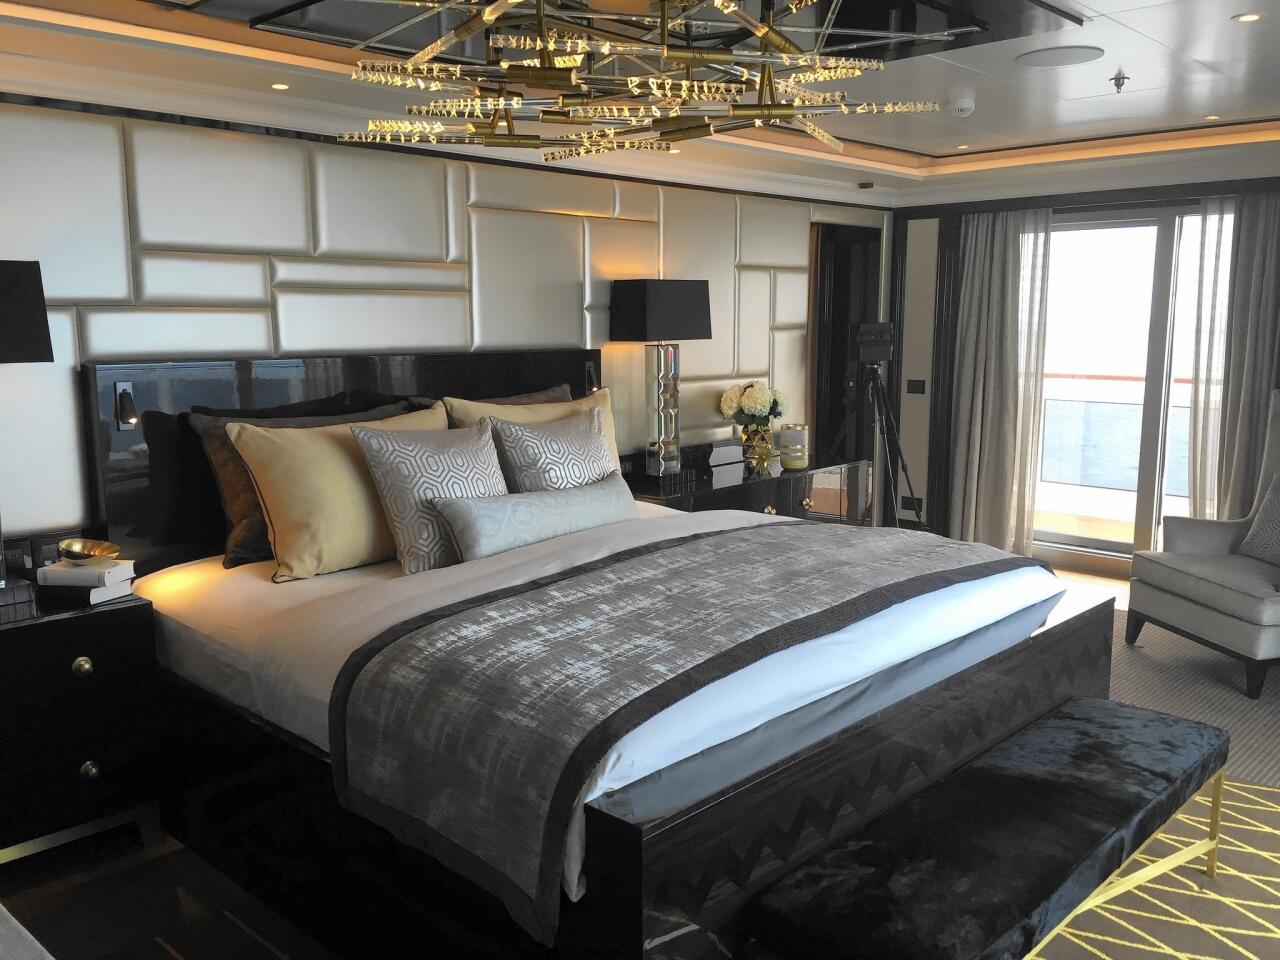 A handcrafted Savoir bed is the centerpiece of the suite's master bedroom. The mattress retails for $90,000.